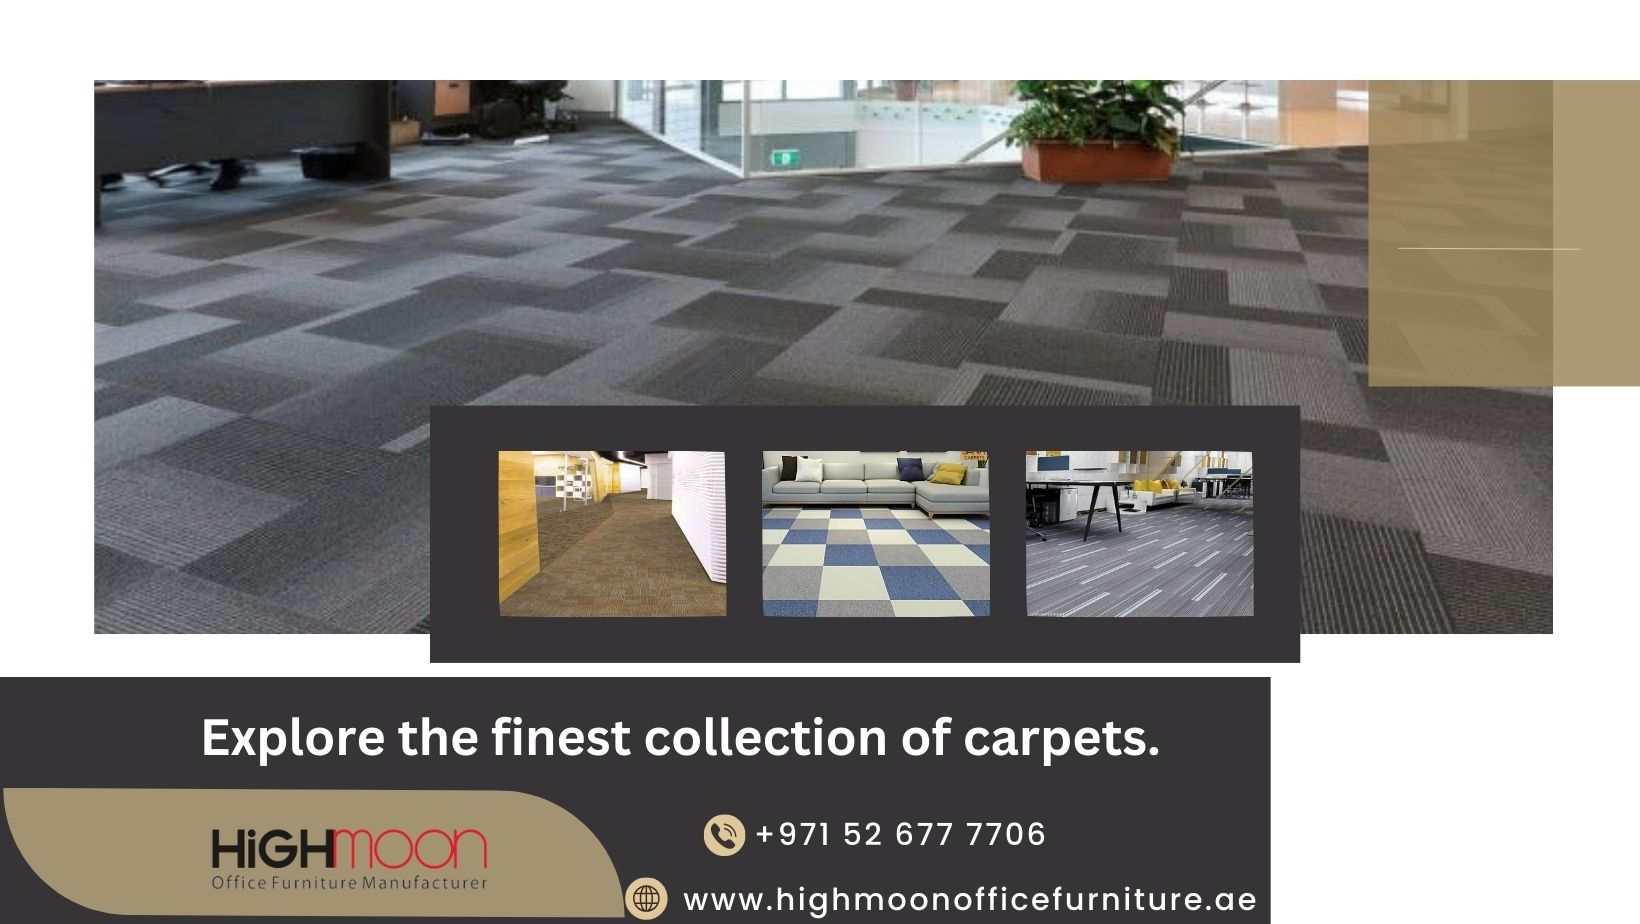 Choose from the Best Carpet Tiles Collection